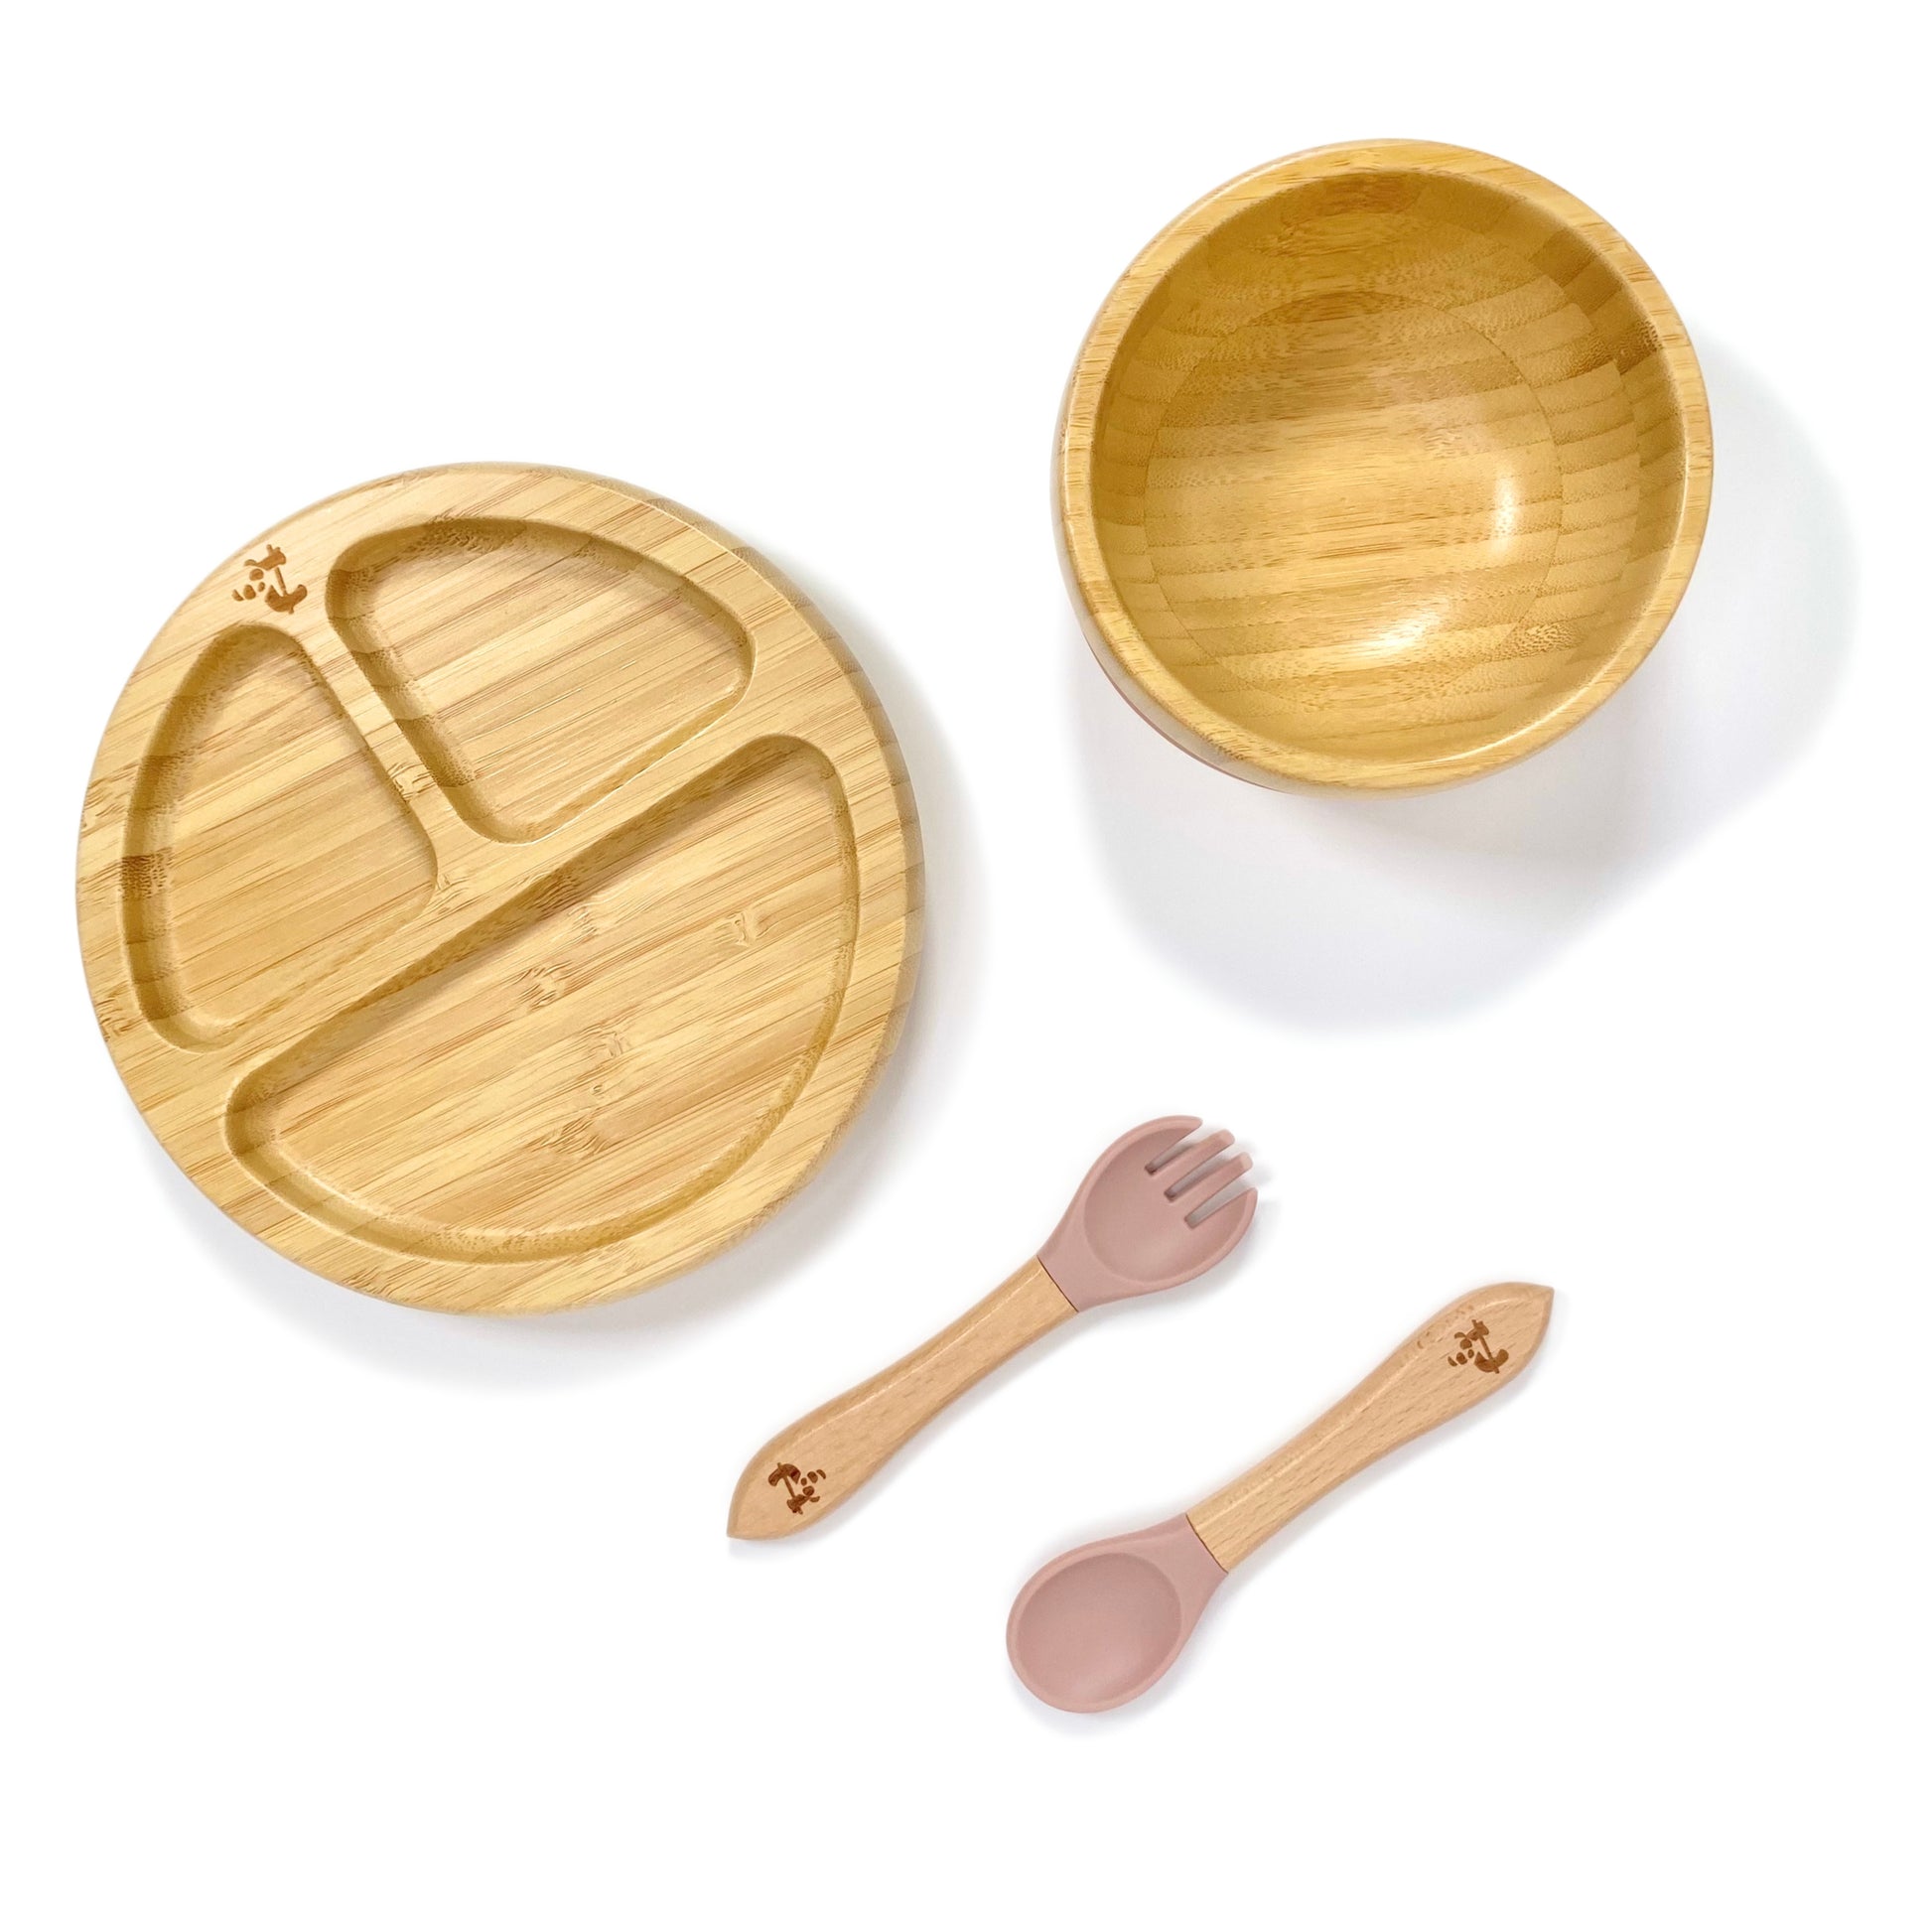 A children’s bamboo tableware set, including bamboo section plate with blossom pink silicone suction ring, bamboo bowl with blossom pink silicone suction ring and matching bamboo and silicone cutlery.